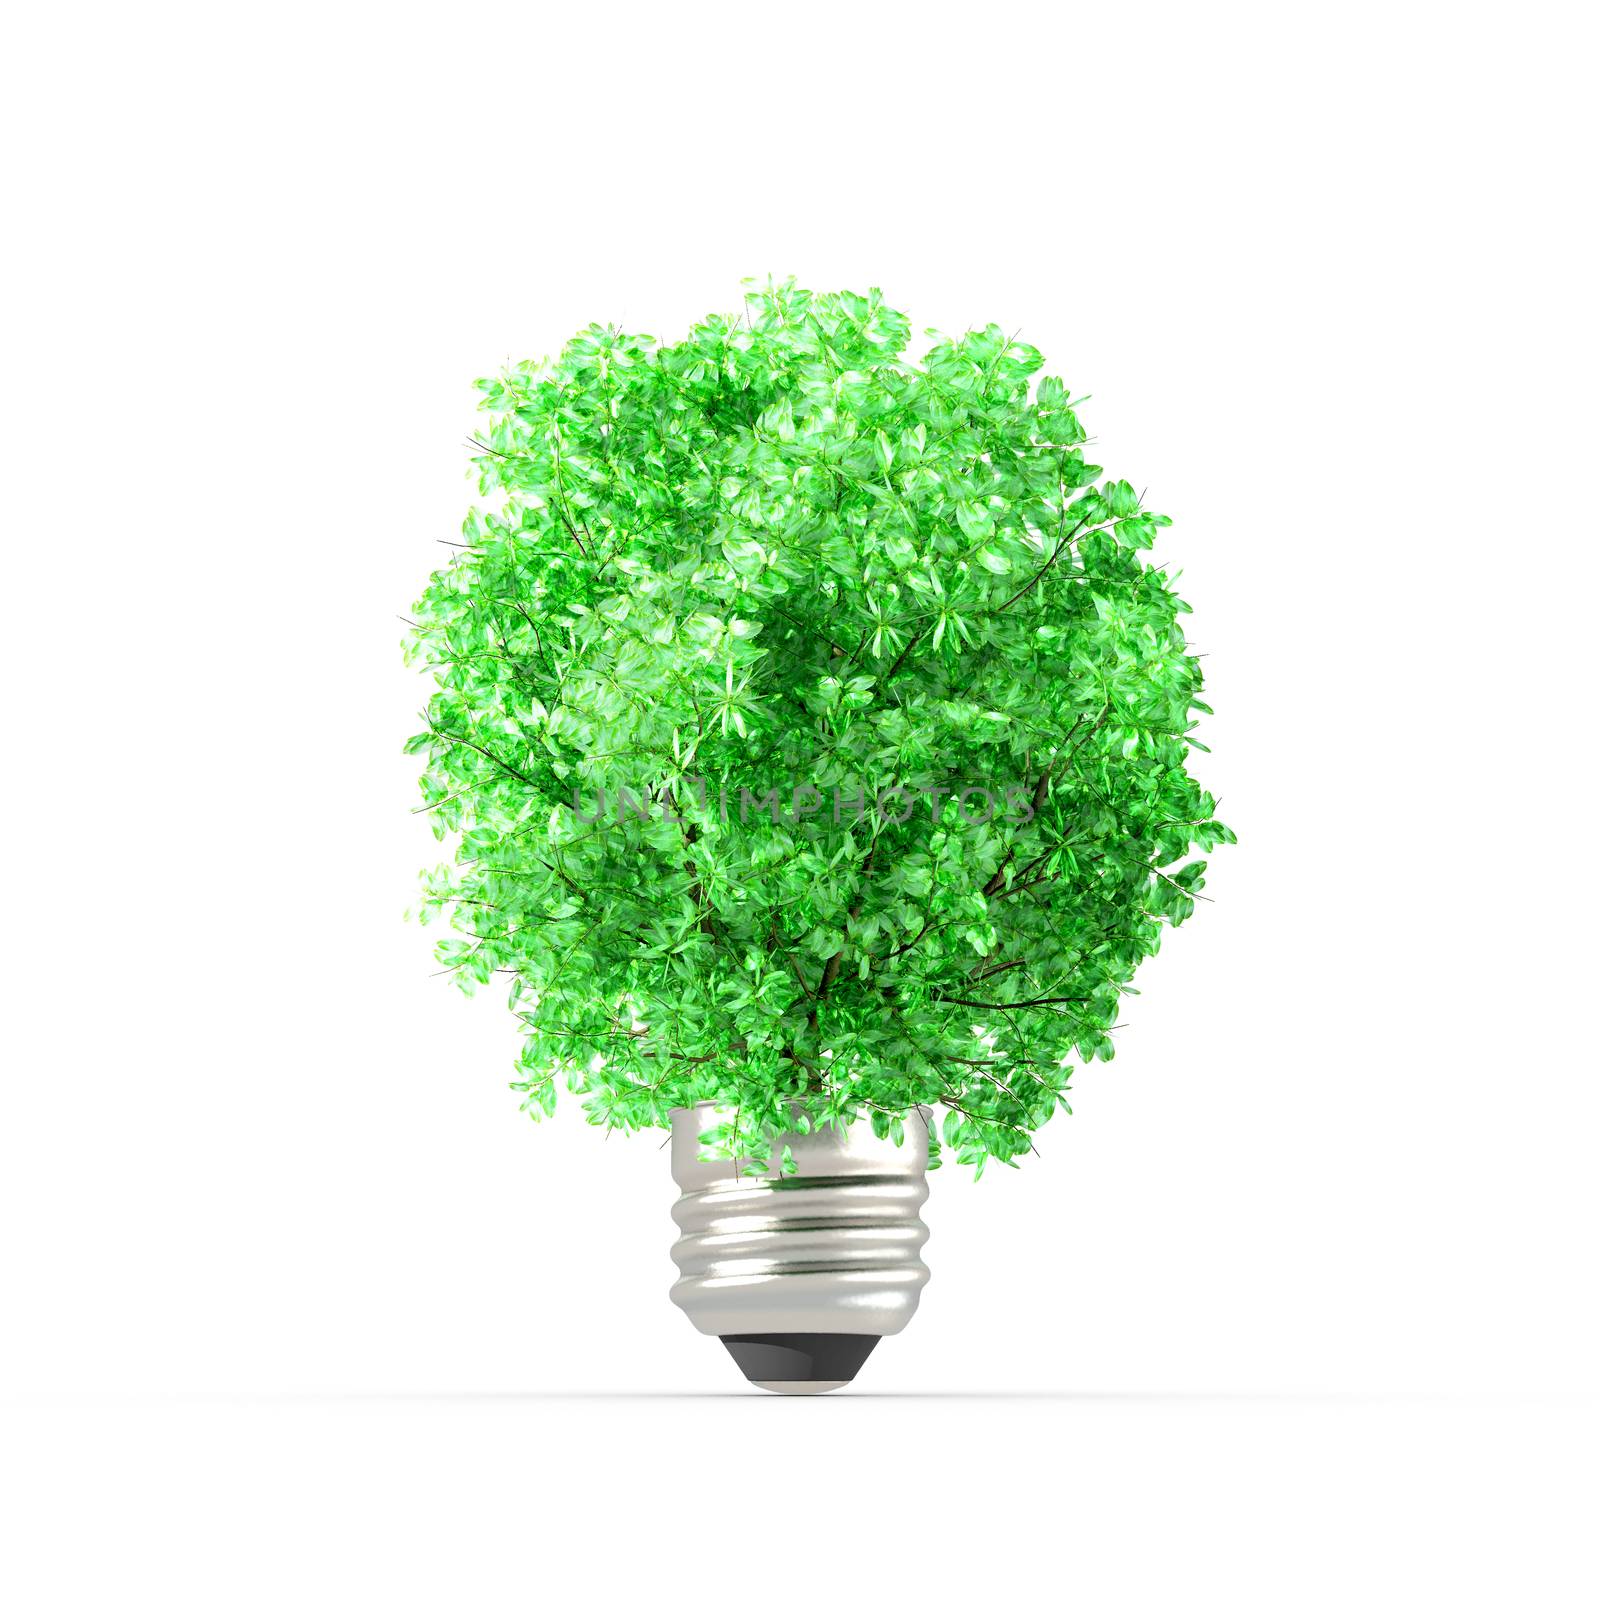 Concept of plant replacing the light bulb. by ytjo